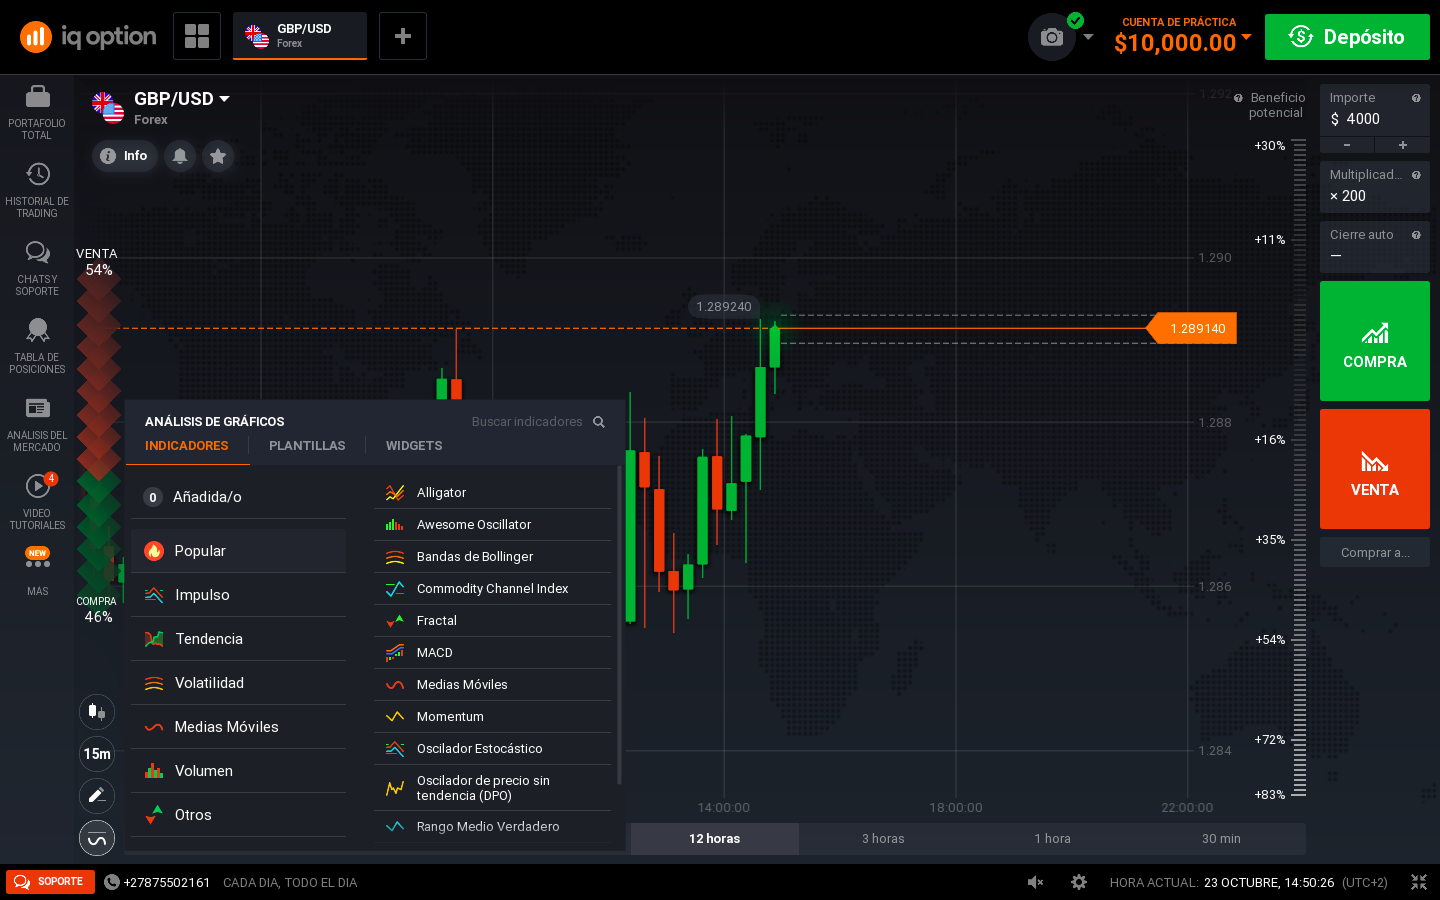 The IQ Option App for PC